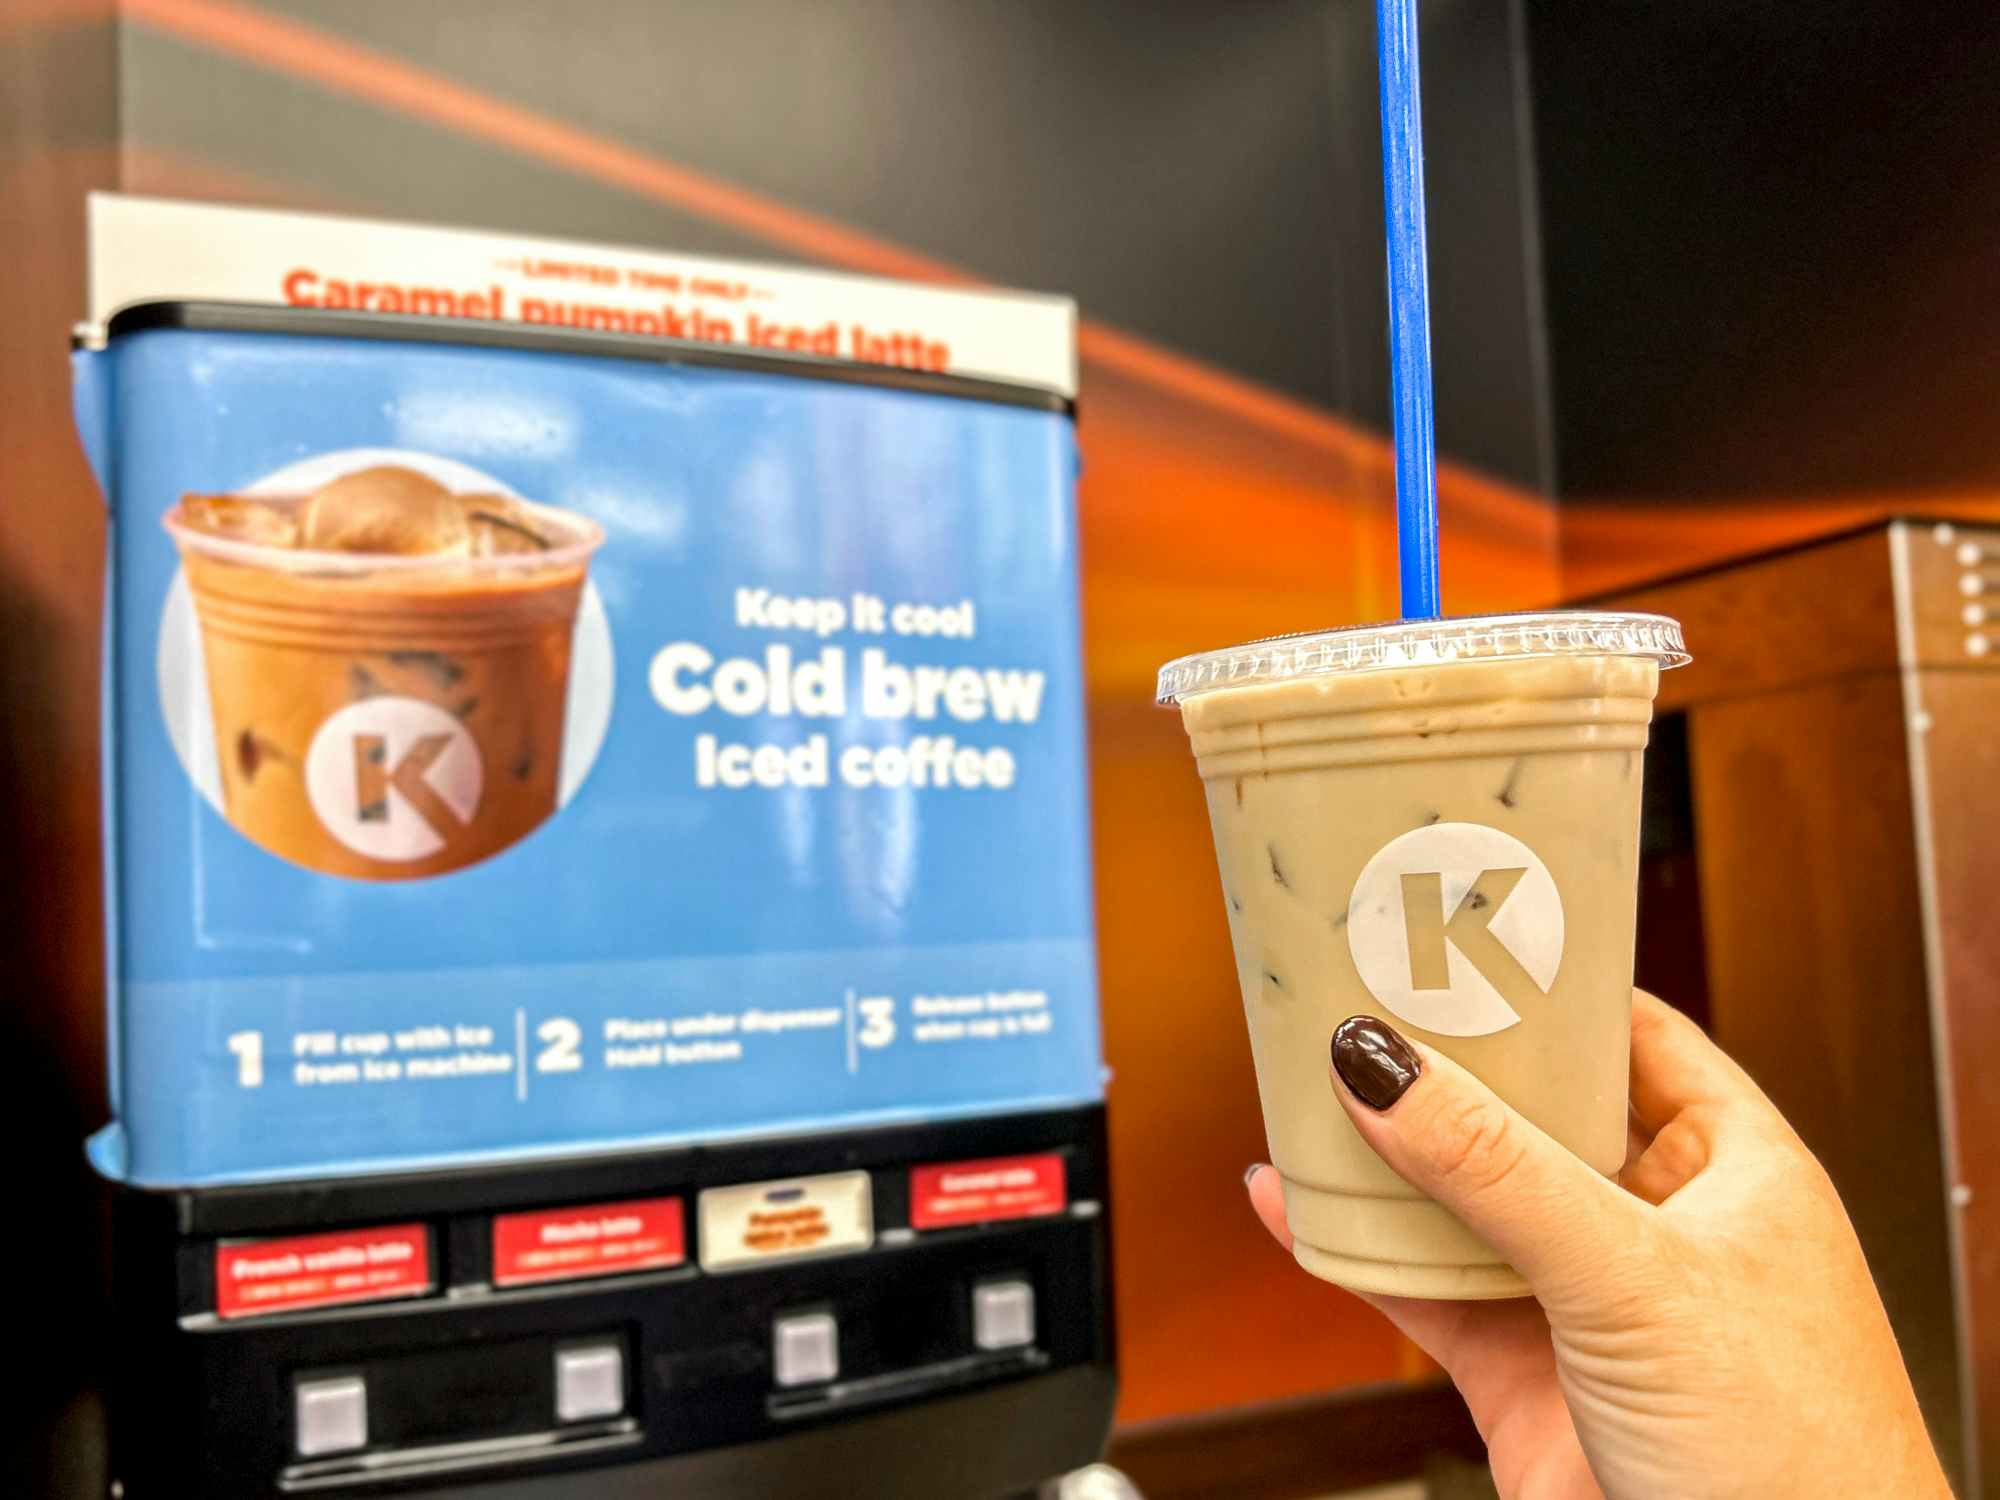 a person holding up a circle k coffee